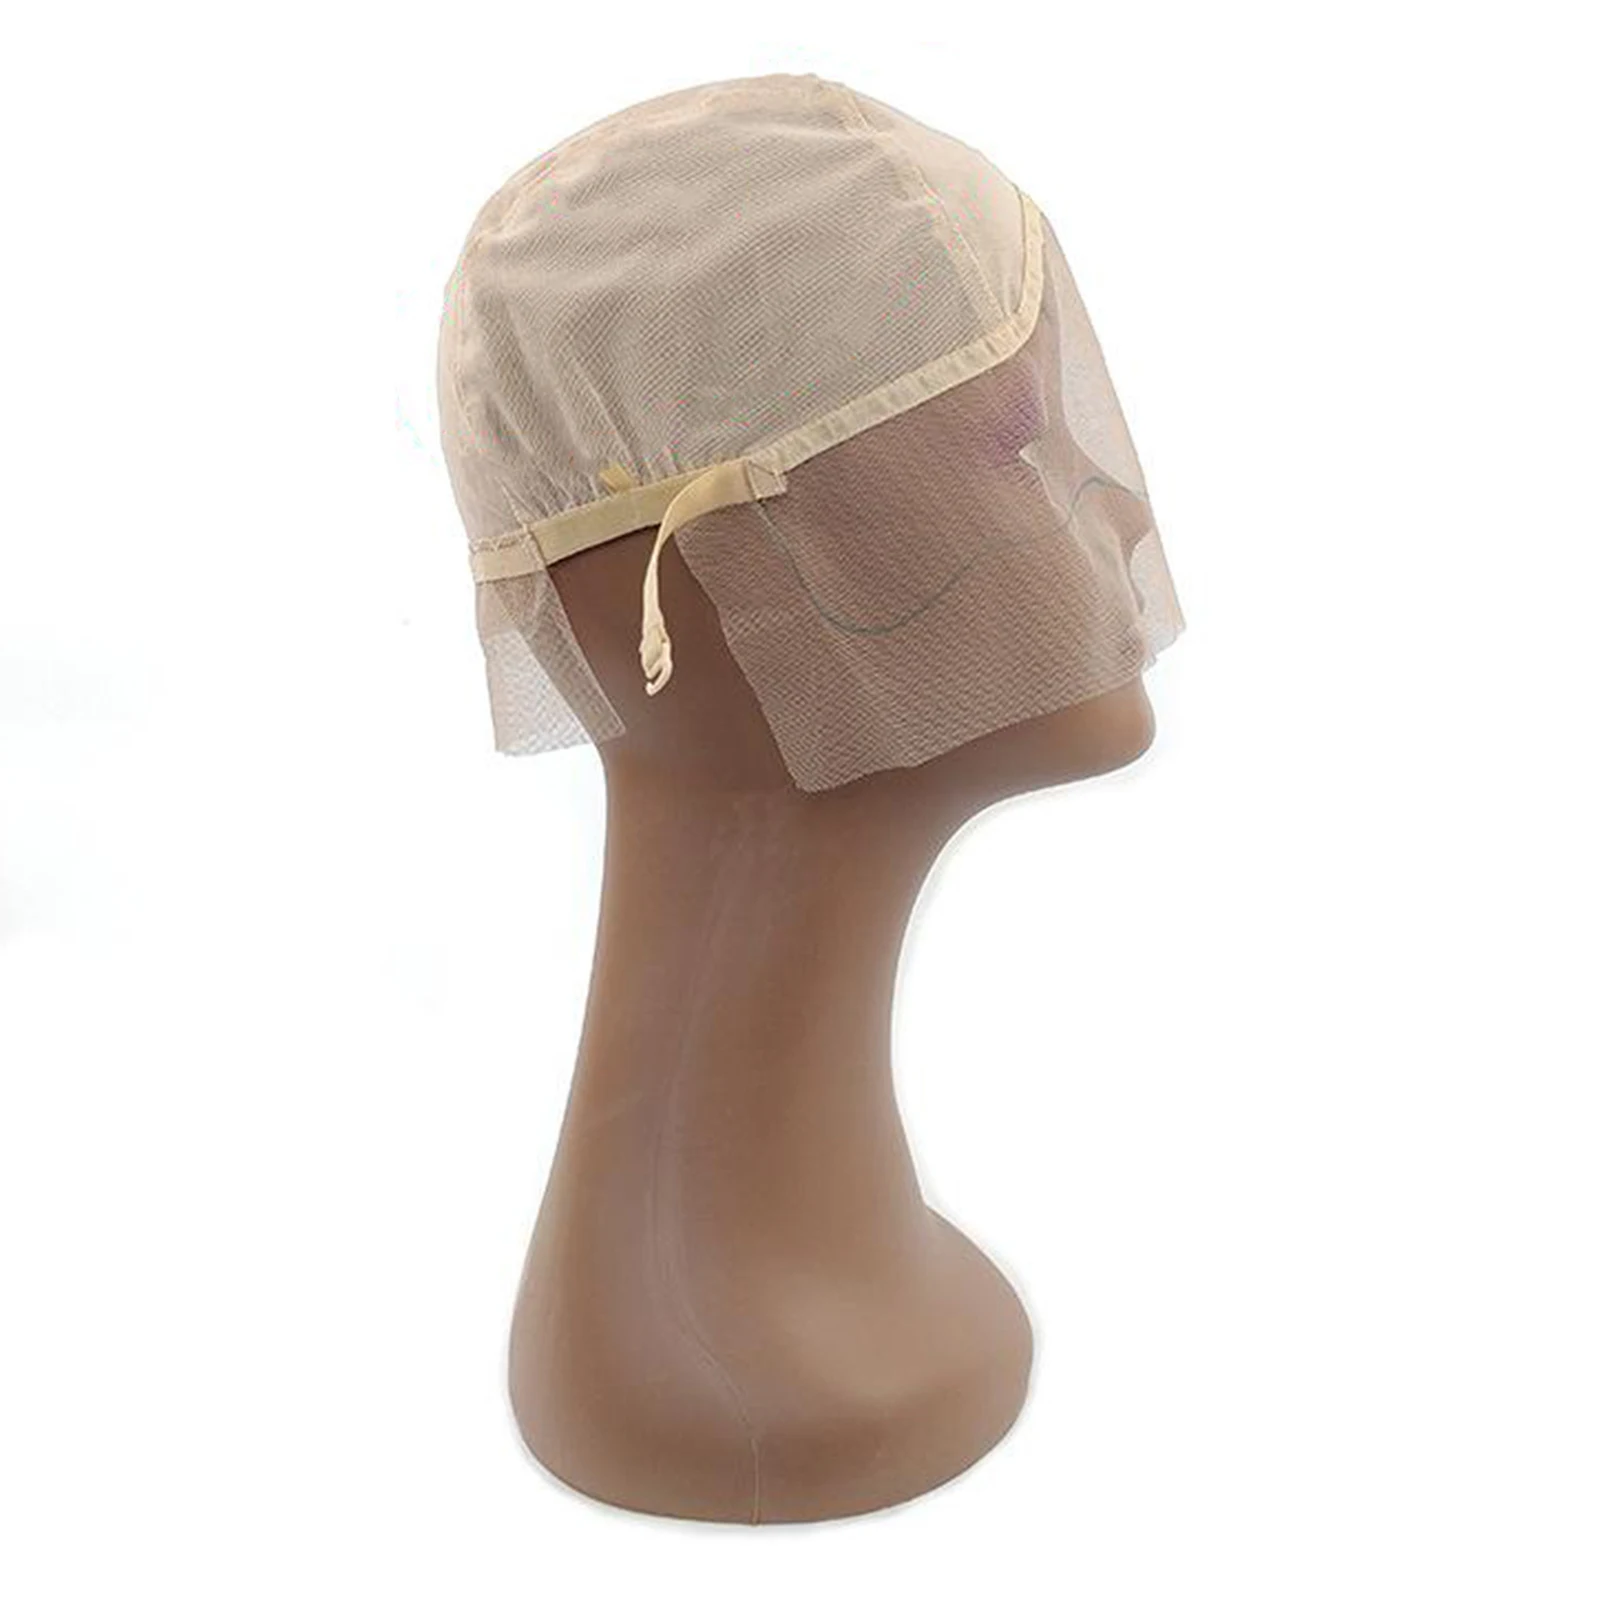 Beige Lace Front Wig Cap for Making Wigs With Adjustable Strap, Easy DIY Lace Cap, Wig foundation